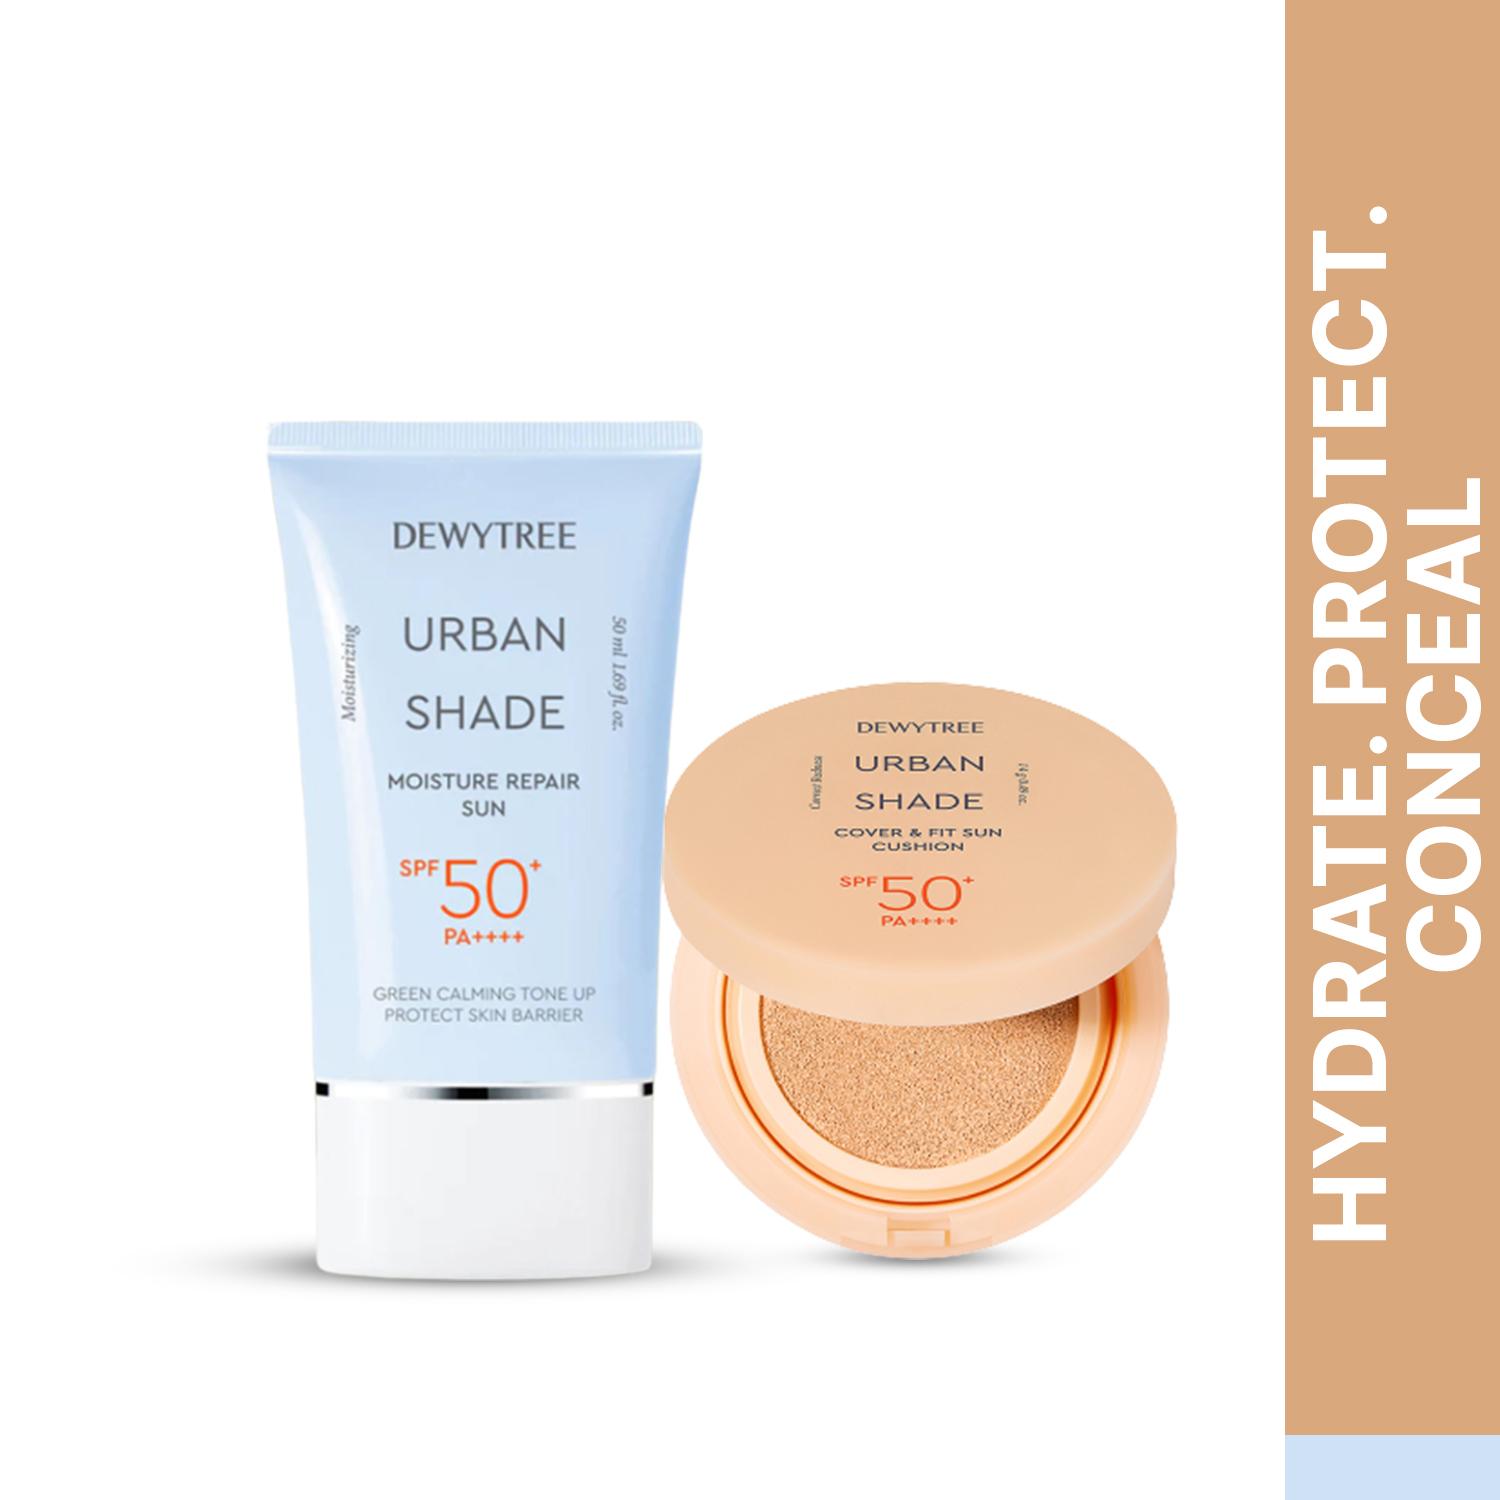 Dewytree Urban Shade Moisture Repair Sunscreen SPF And Cover & Fit Sun Cushion SPF Combo